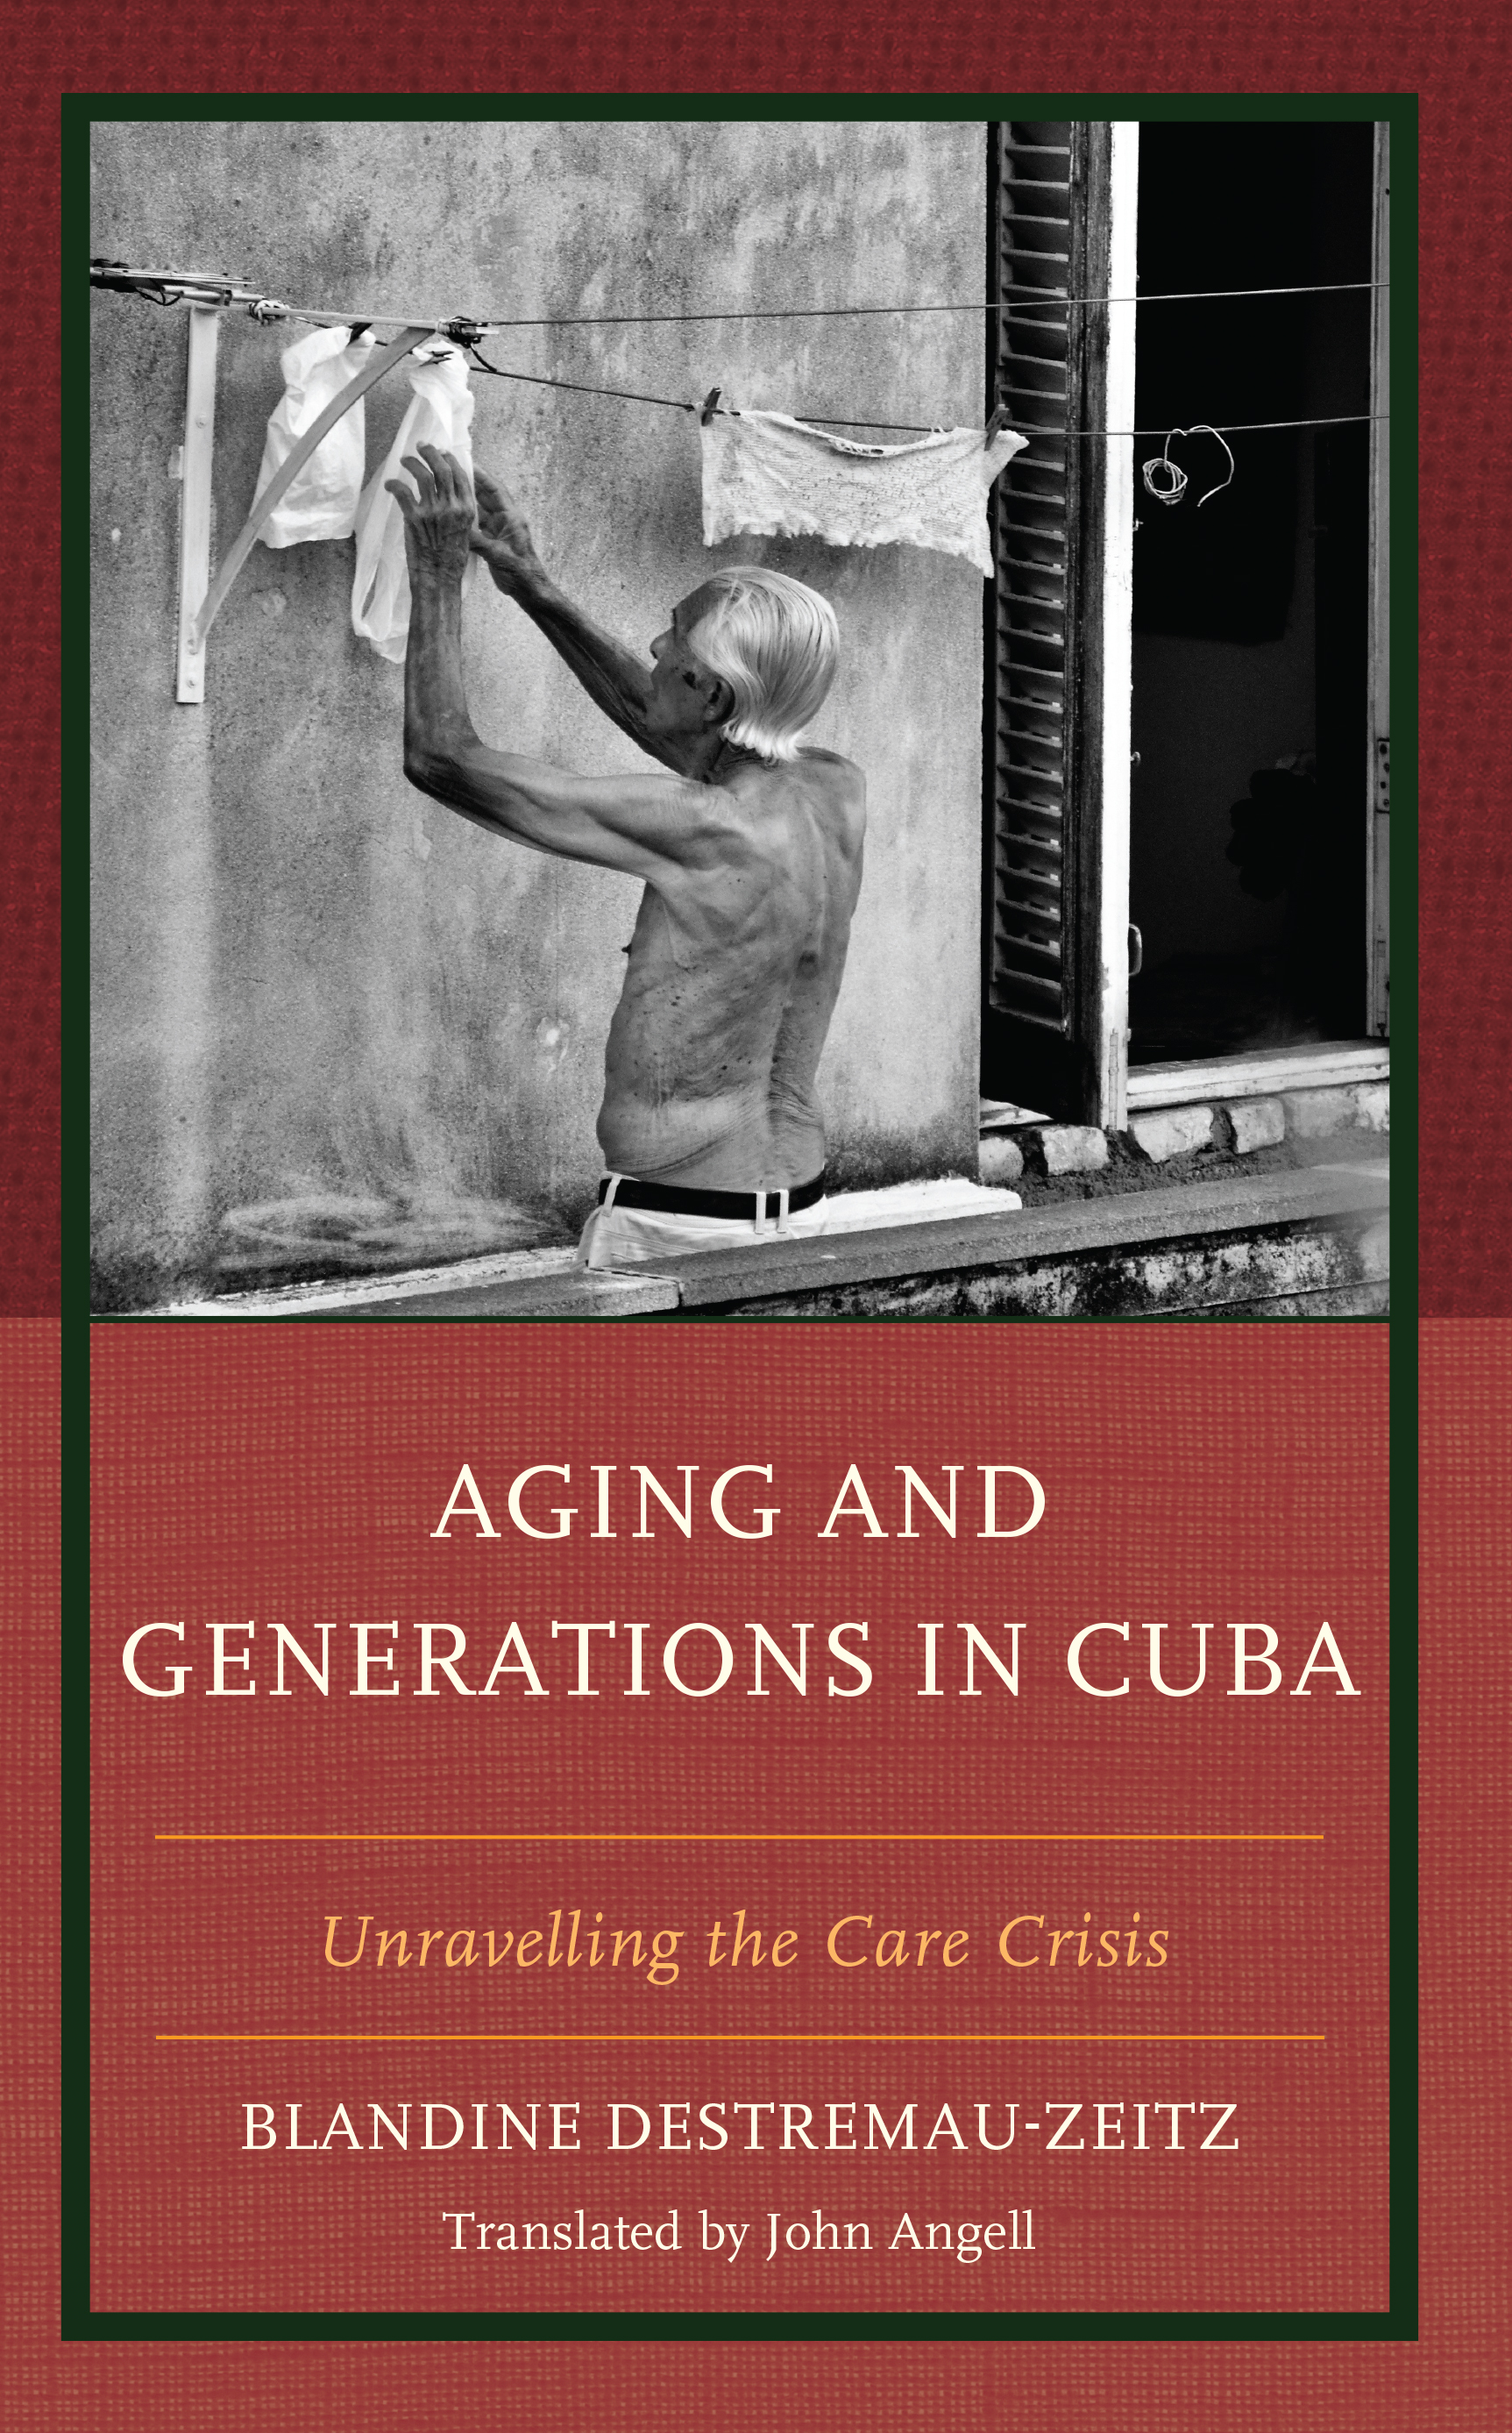 Aging and Generations in Cuba: Unravelling the Care Crisis